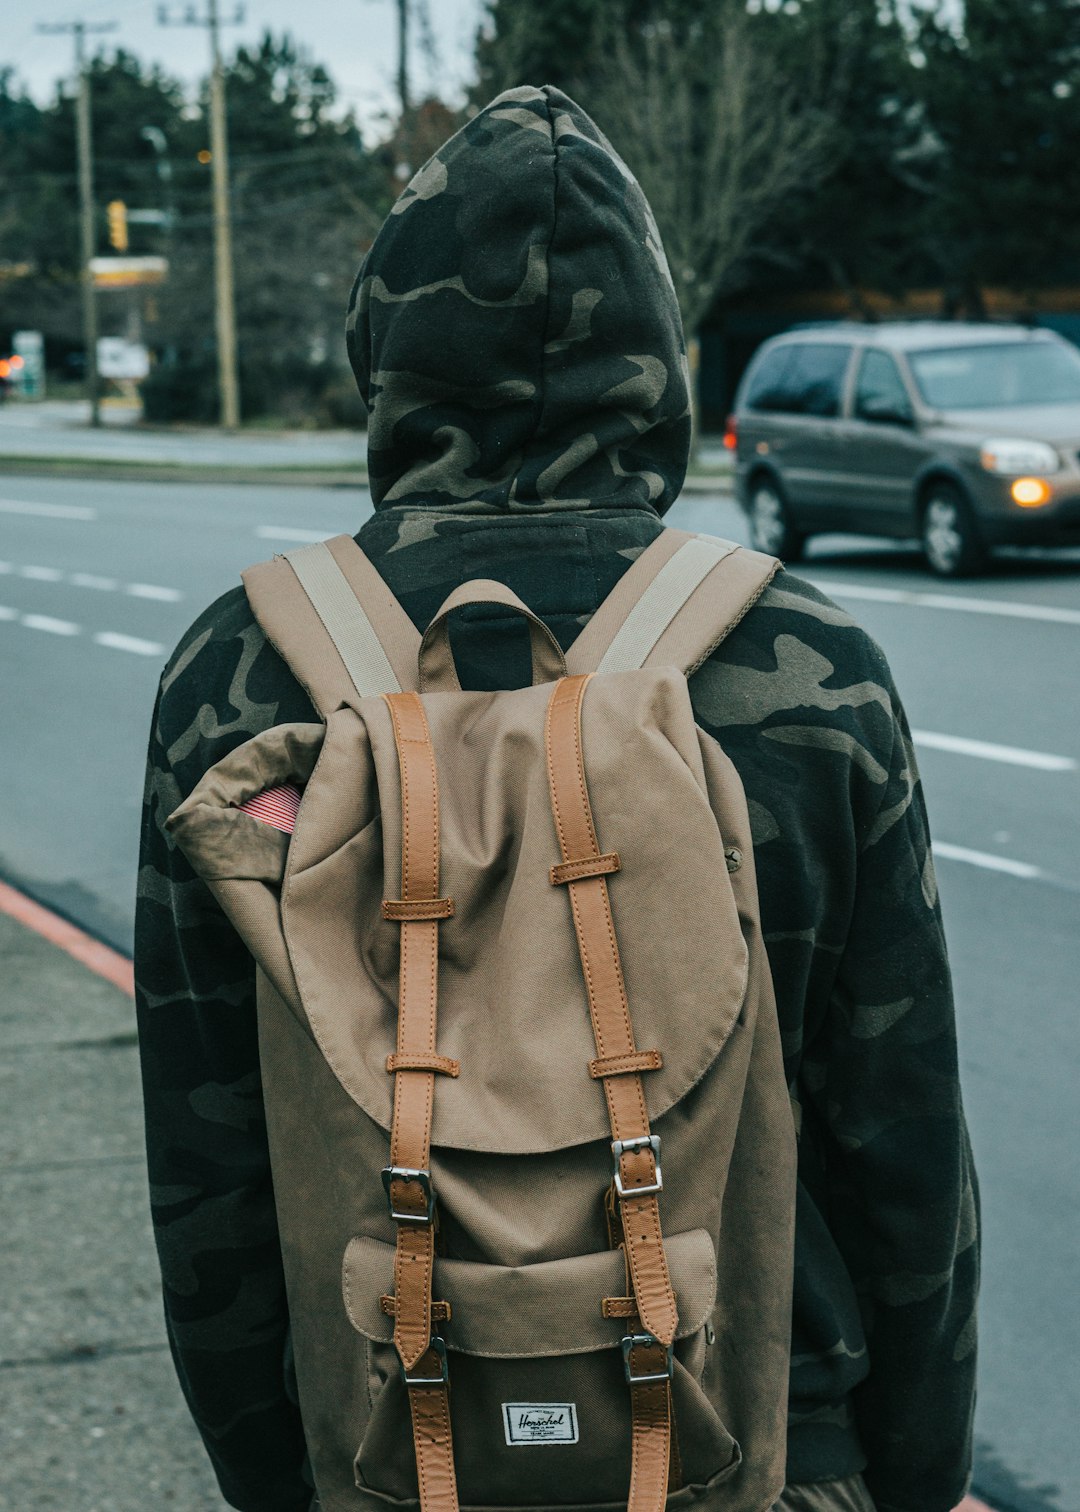 person wearing gray knapsack bag and hoodie jacket during daytime